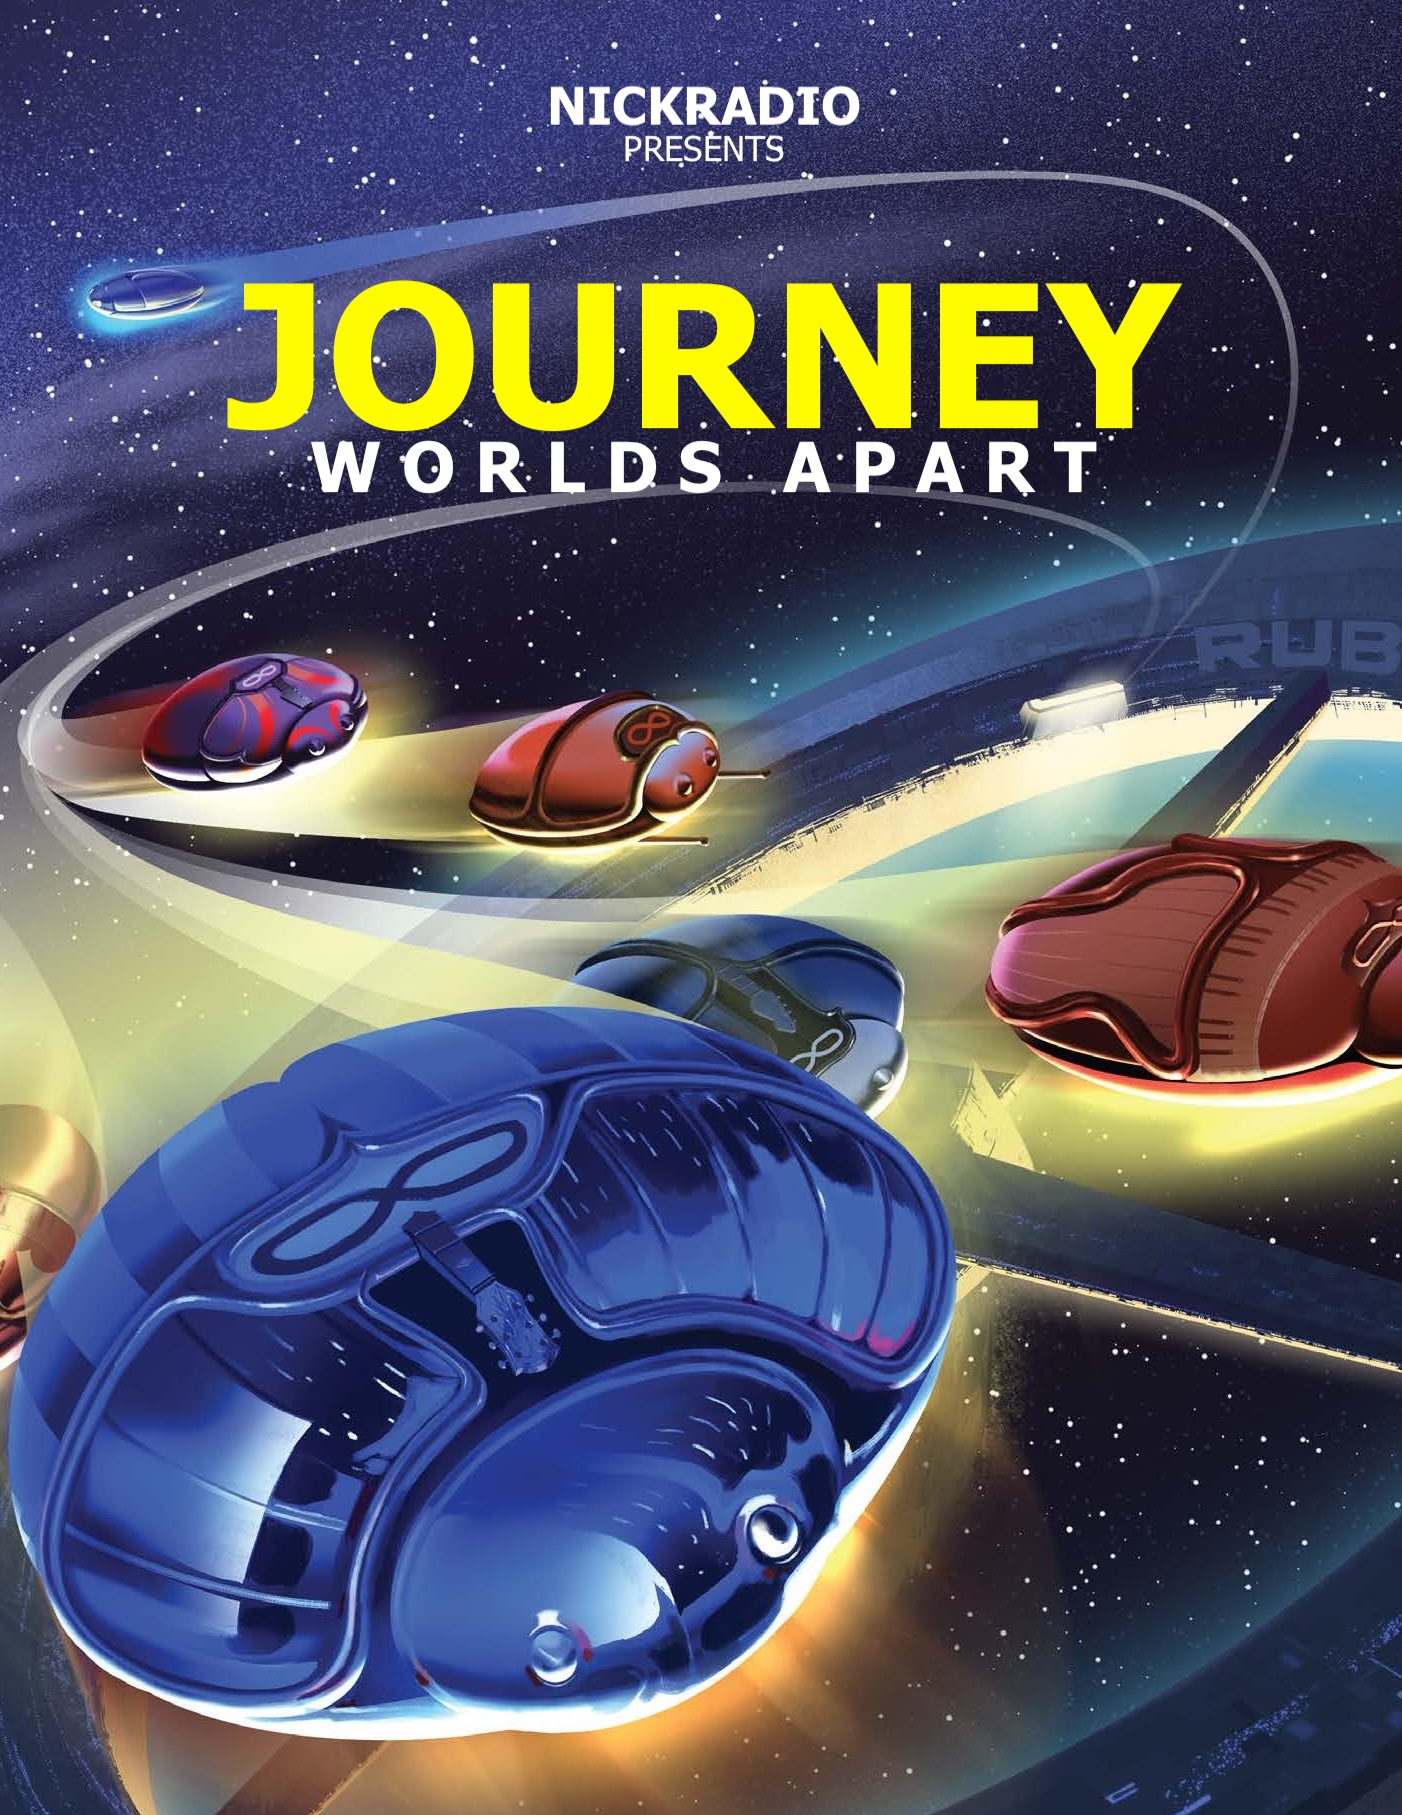 Art for Classic Rewind: Journey and Faithfully (1983) by Casey Kasem